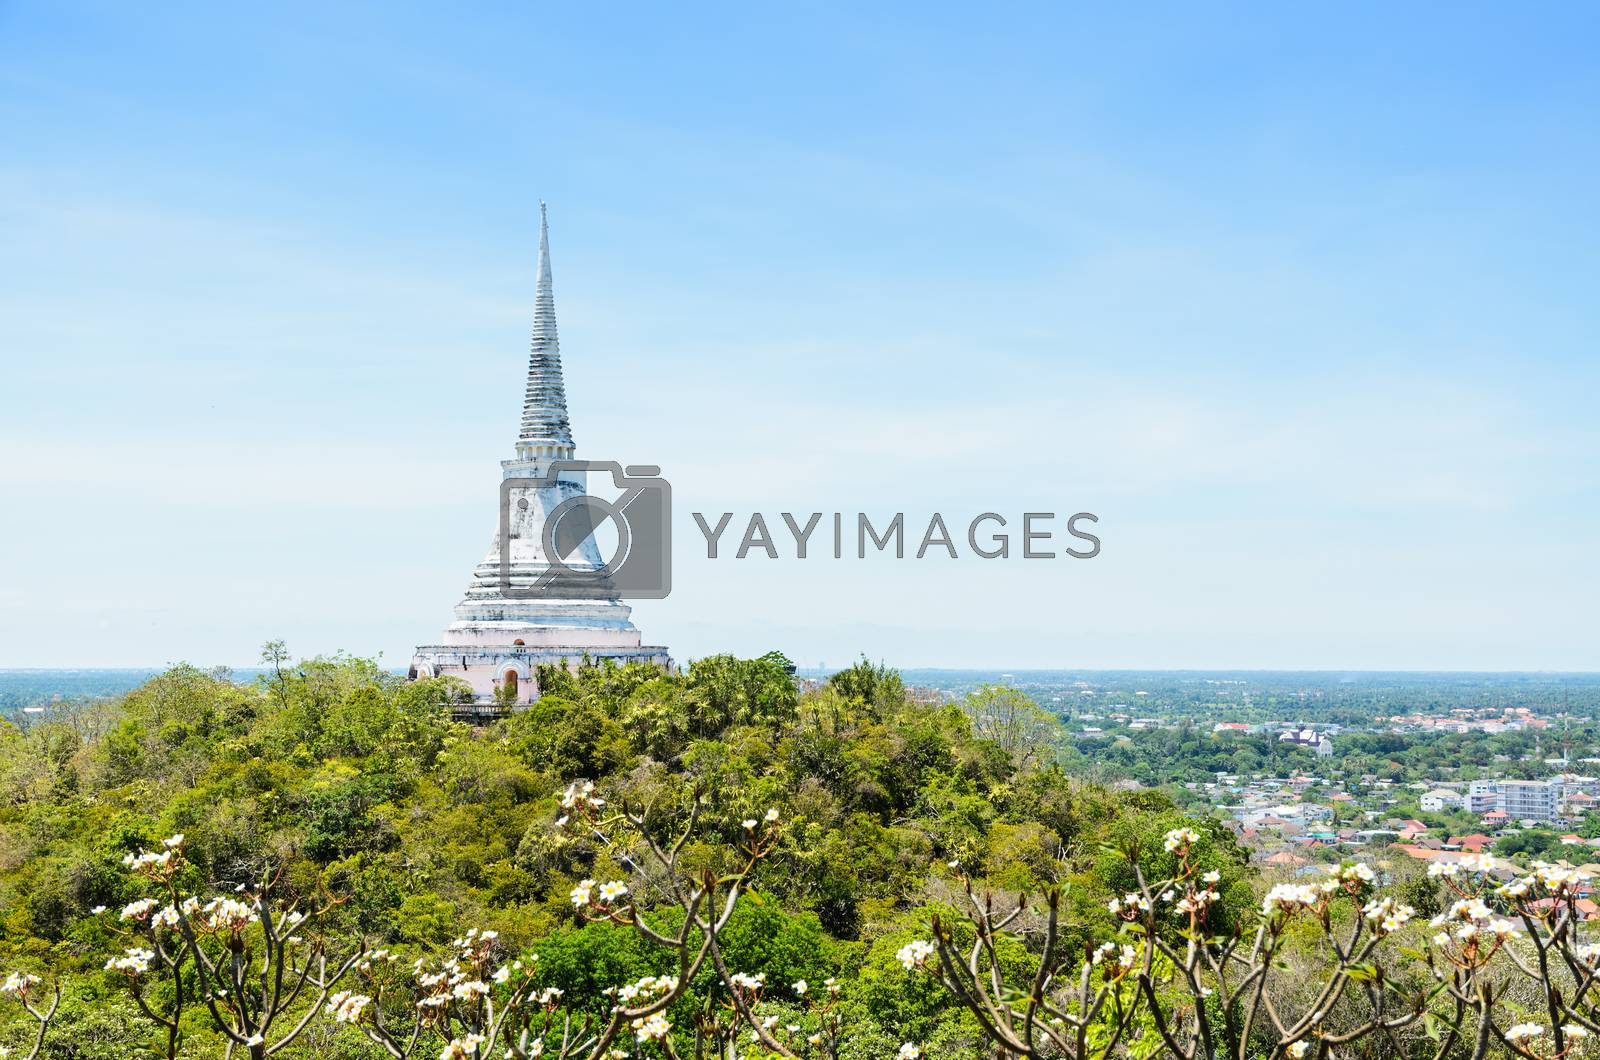 Royalty free image of Pagoda on mountain in Phra Nakhon Khiri temple by Yongkiet